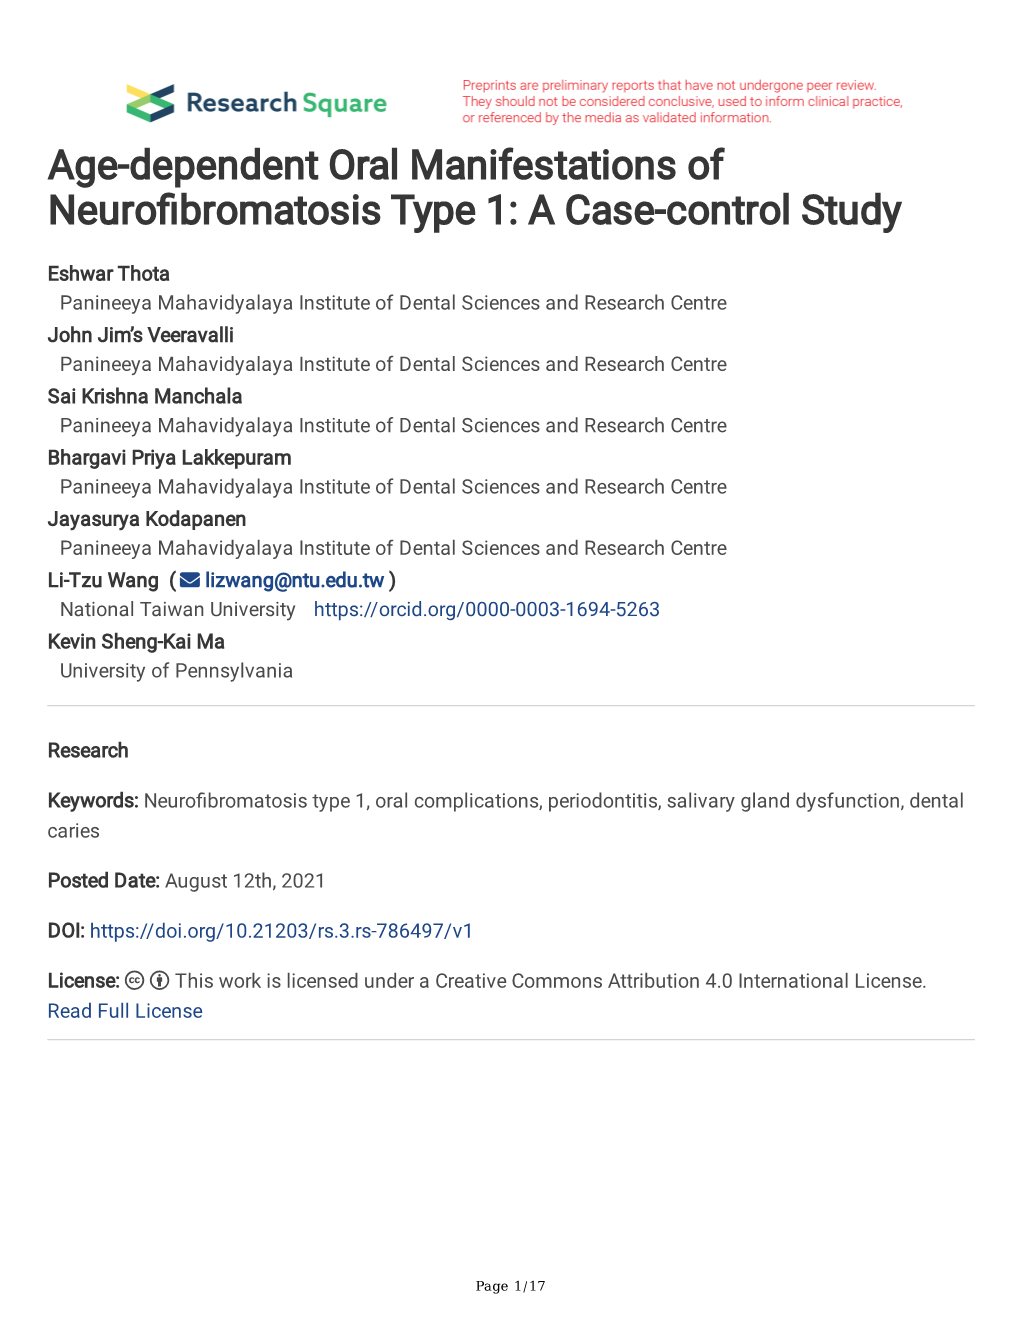 Age-Dependent Oral Manifestations of Neuro Bromatosis Type 1